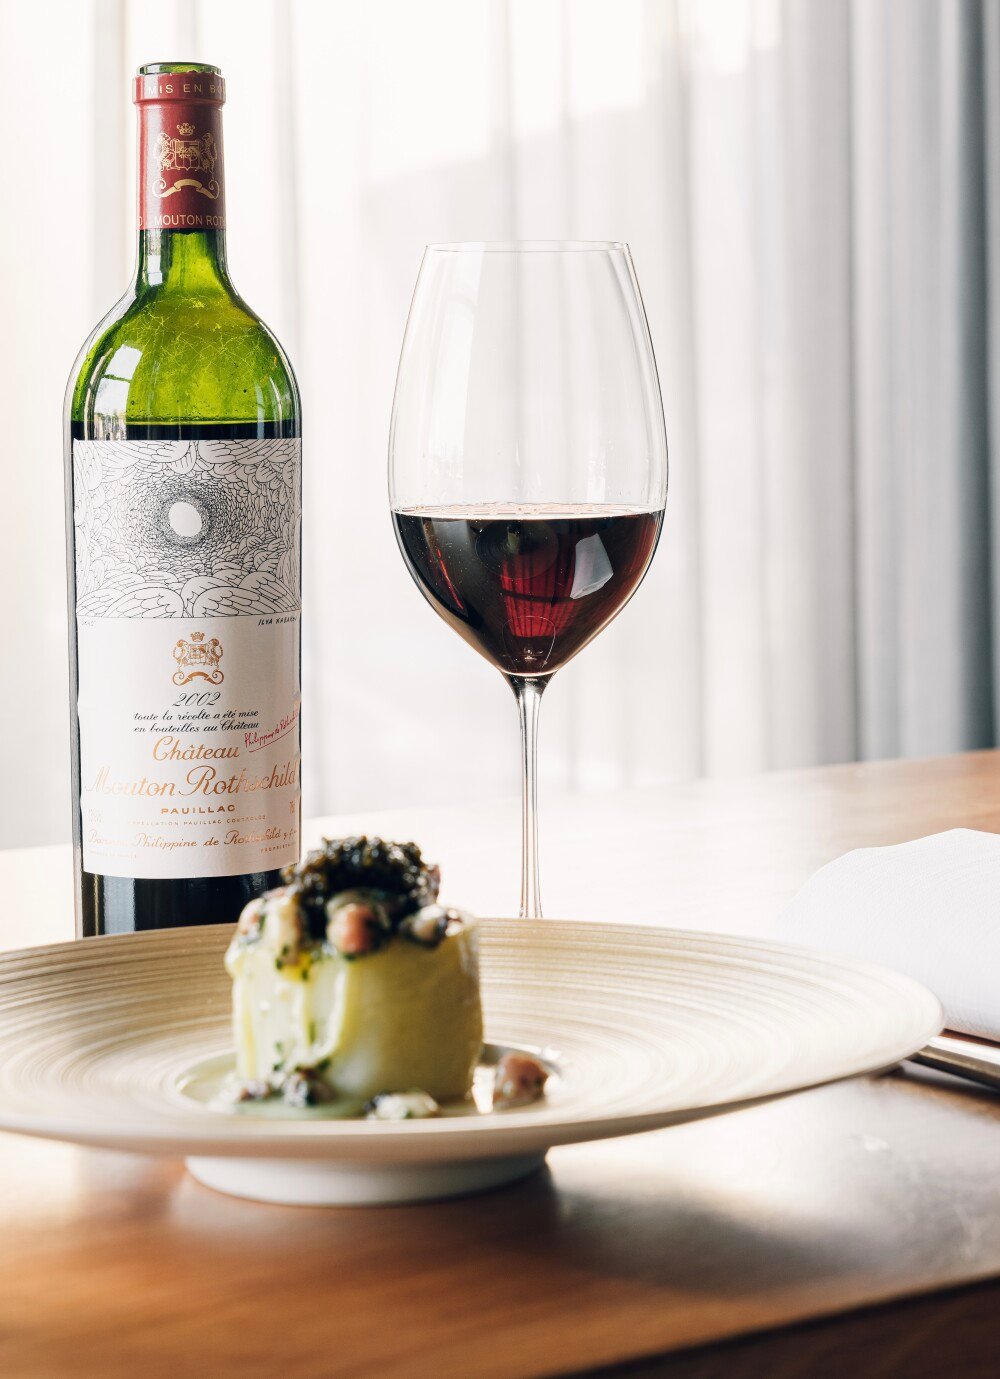 10 Things to know about Château Mouton Rothschild